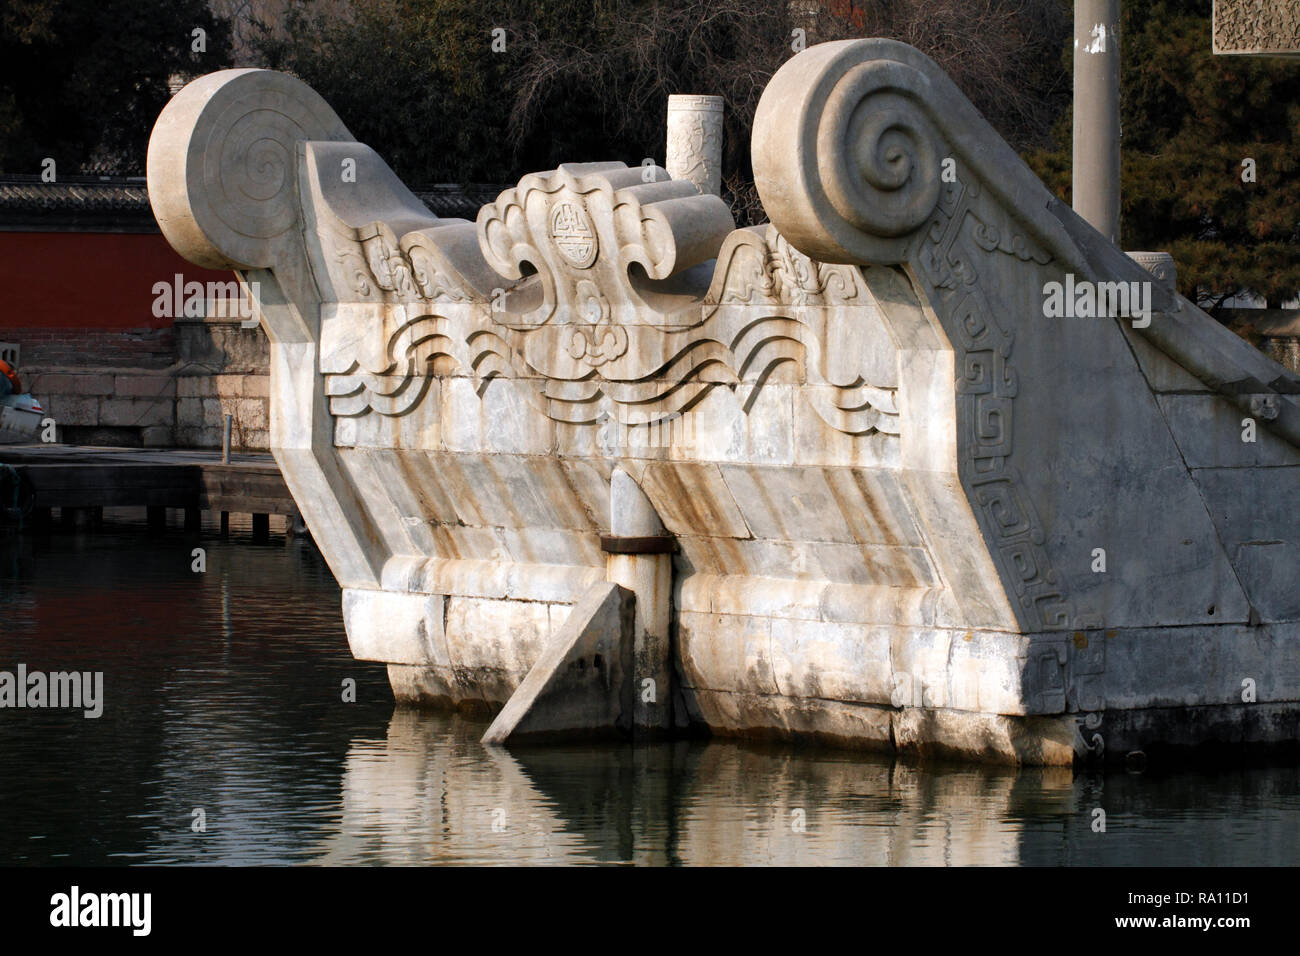 The stone or marble boat, made in 1755, Qing dynasty. Repaired  1893, Summer Palace, Beijing. China. Boat of Purity and Ease Clear and Peaceful Boat. Stock Photo